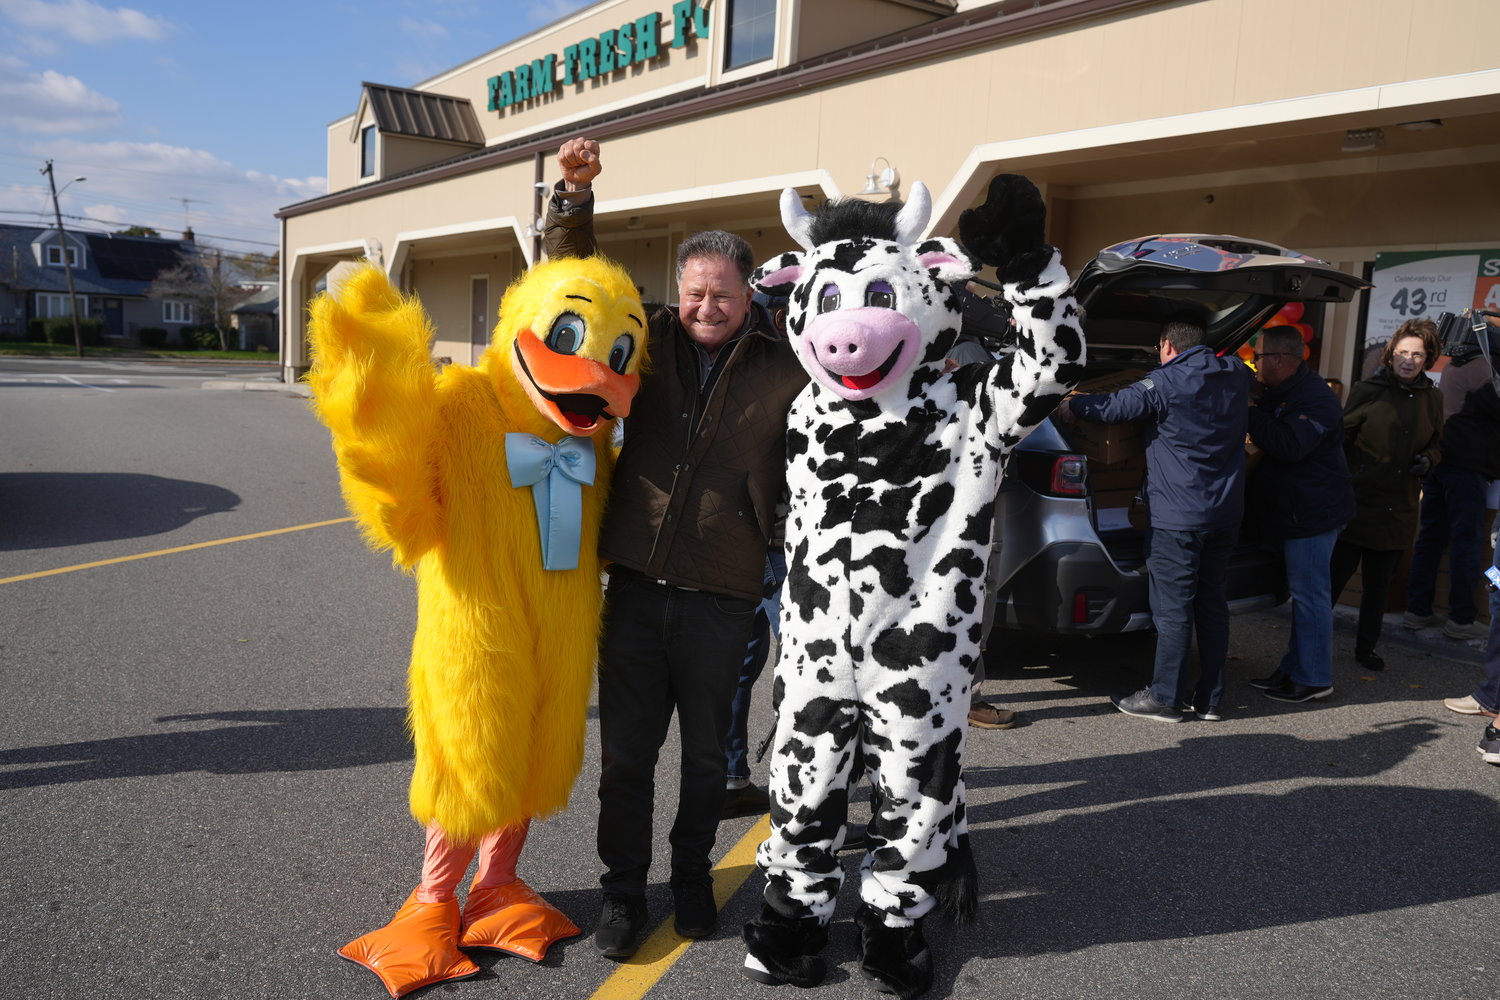 Stew Leonard Jr. stopped by the East Meadow Stew Leonard’s store on Nov. 17 to help hand out nearly 500 turkeys to local organizations in need.